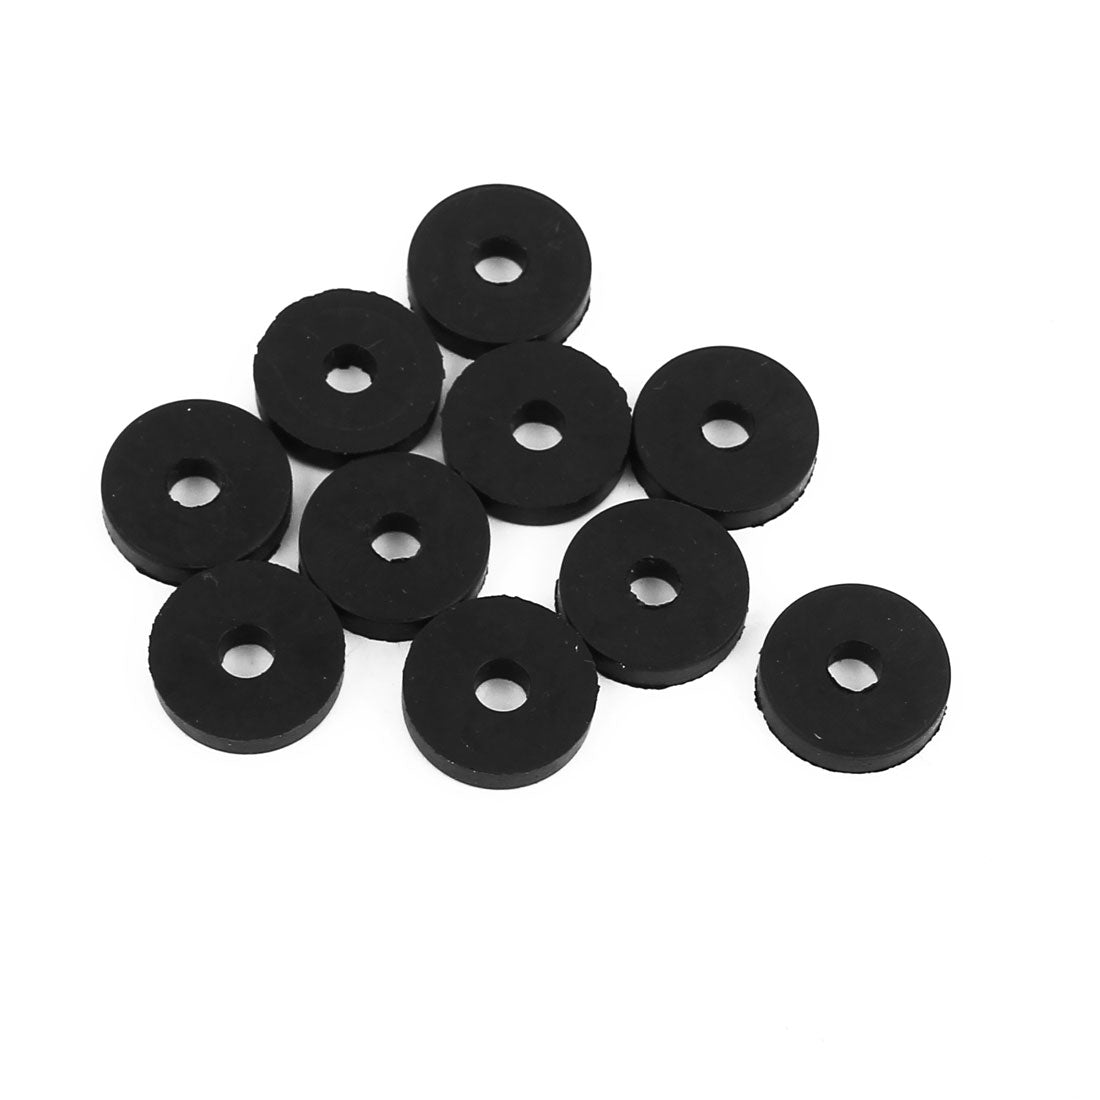 uxcell Uxcell Rubber Round Flat Washer Assortment Size Flat Washers, Black Pack of 10